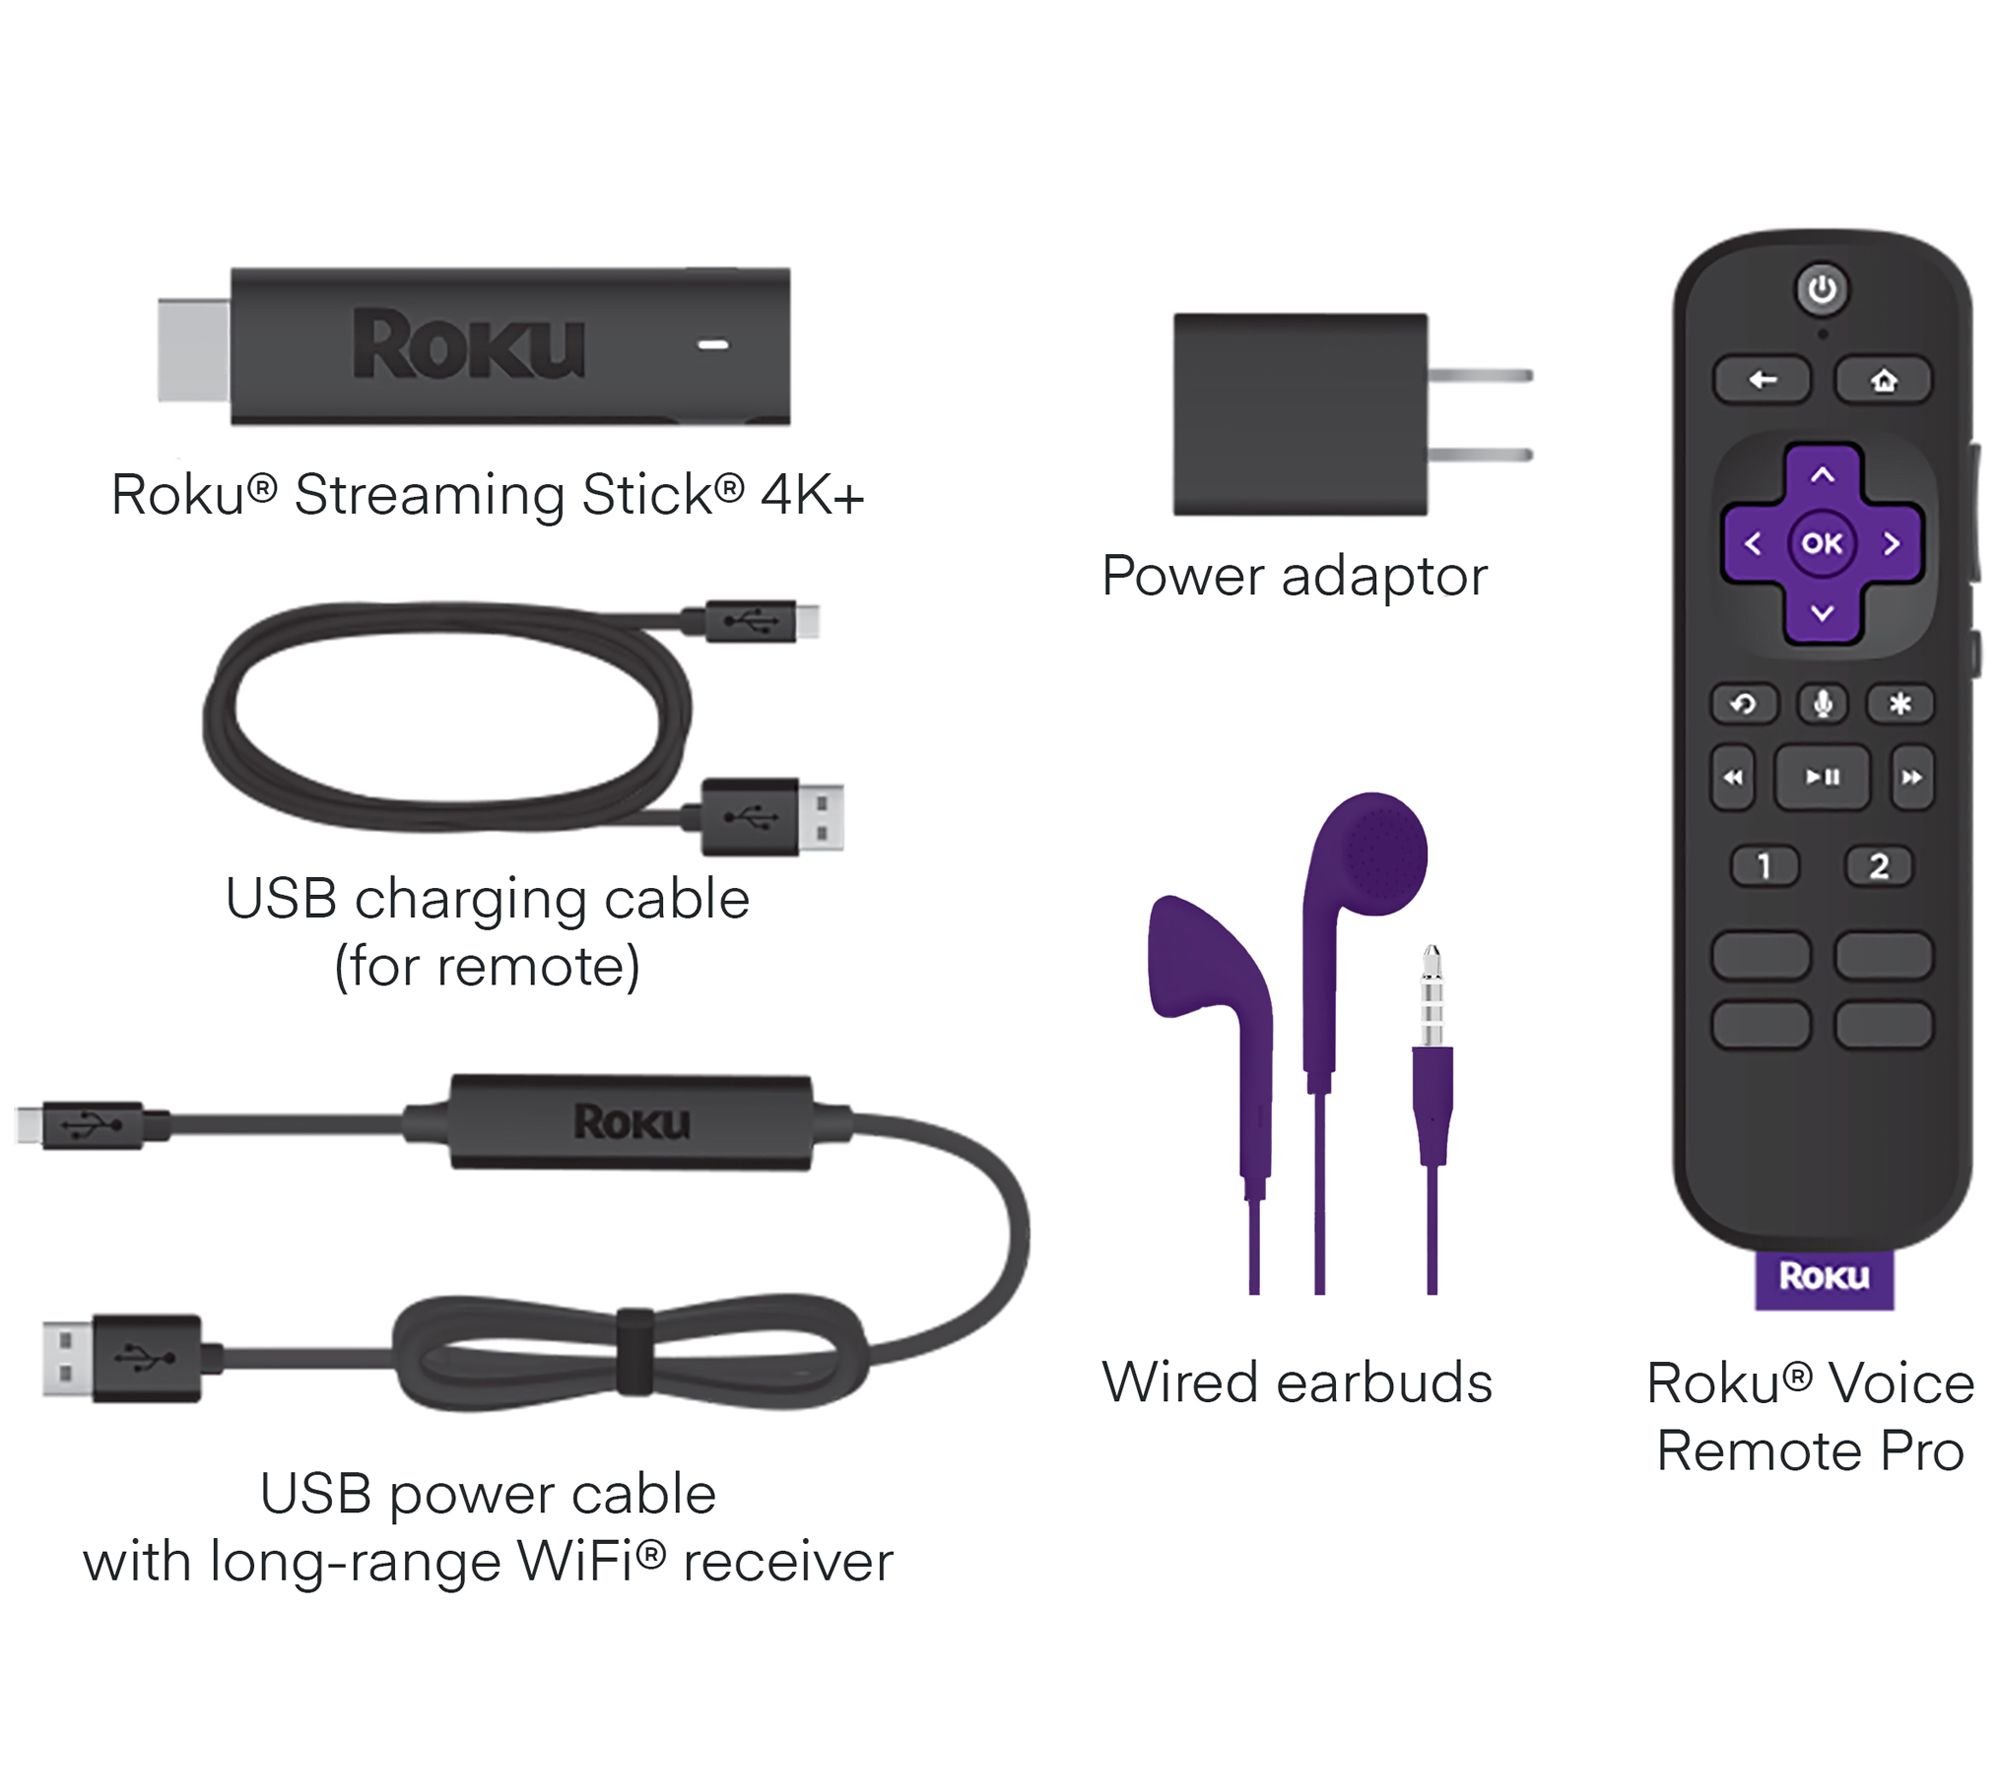 Roku Streaming Stick 4K+ with Voice Remote, Wired Earbuds and